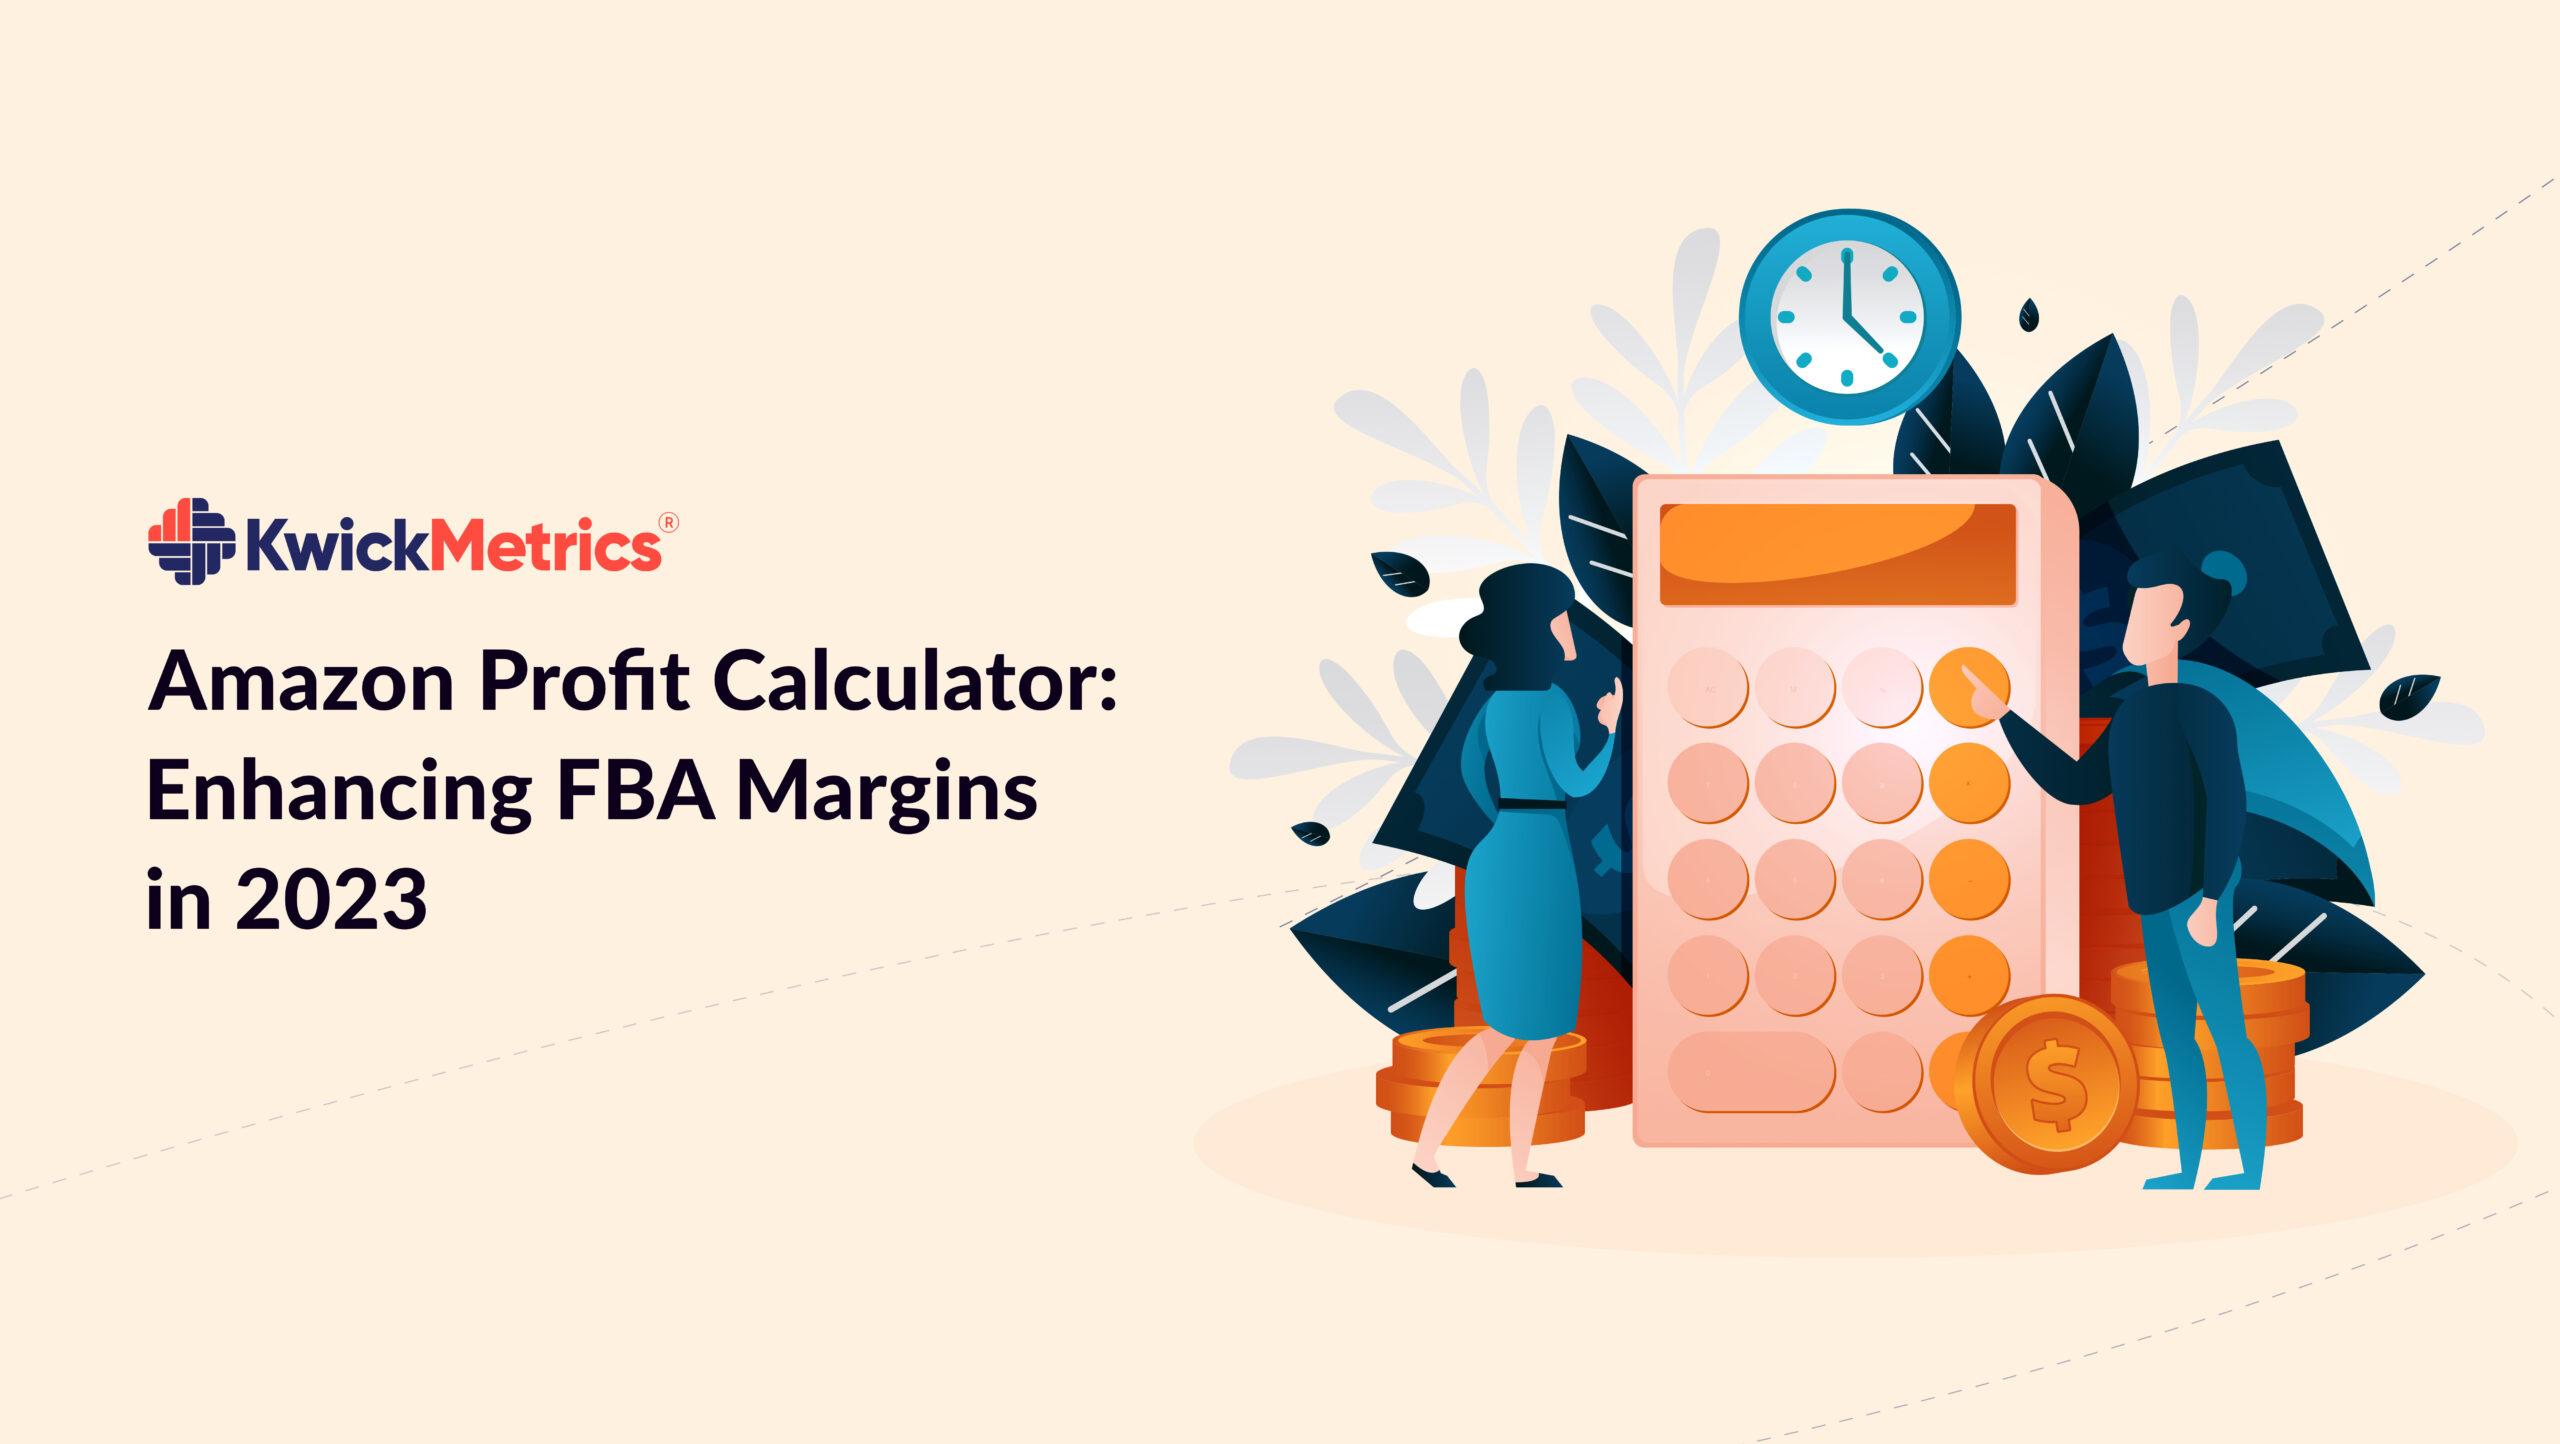 Amazon Profit Calculator: Calculate Your Earnings with Ease